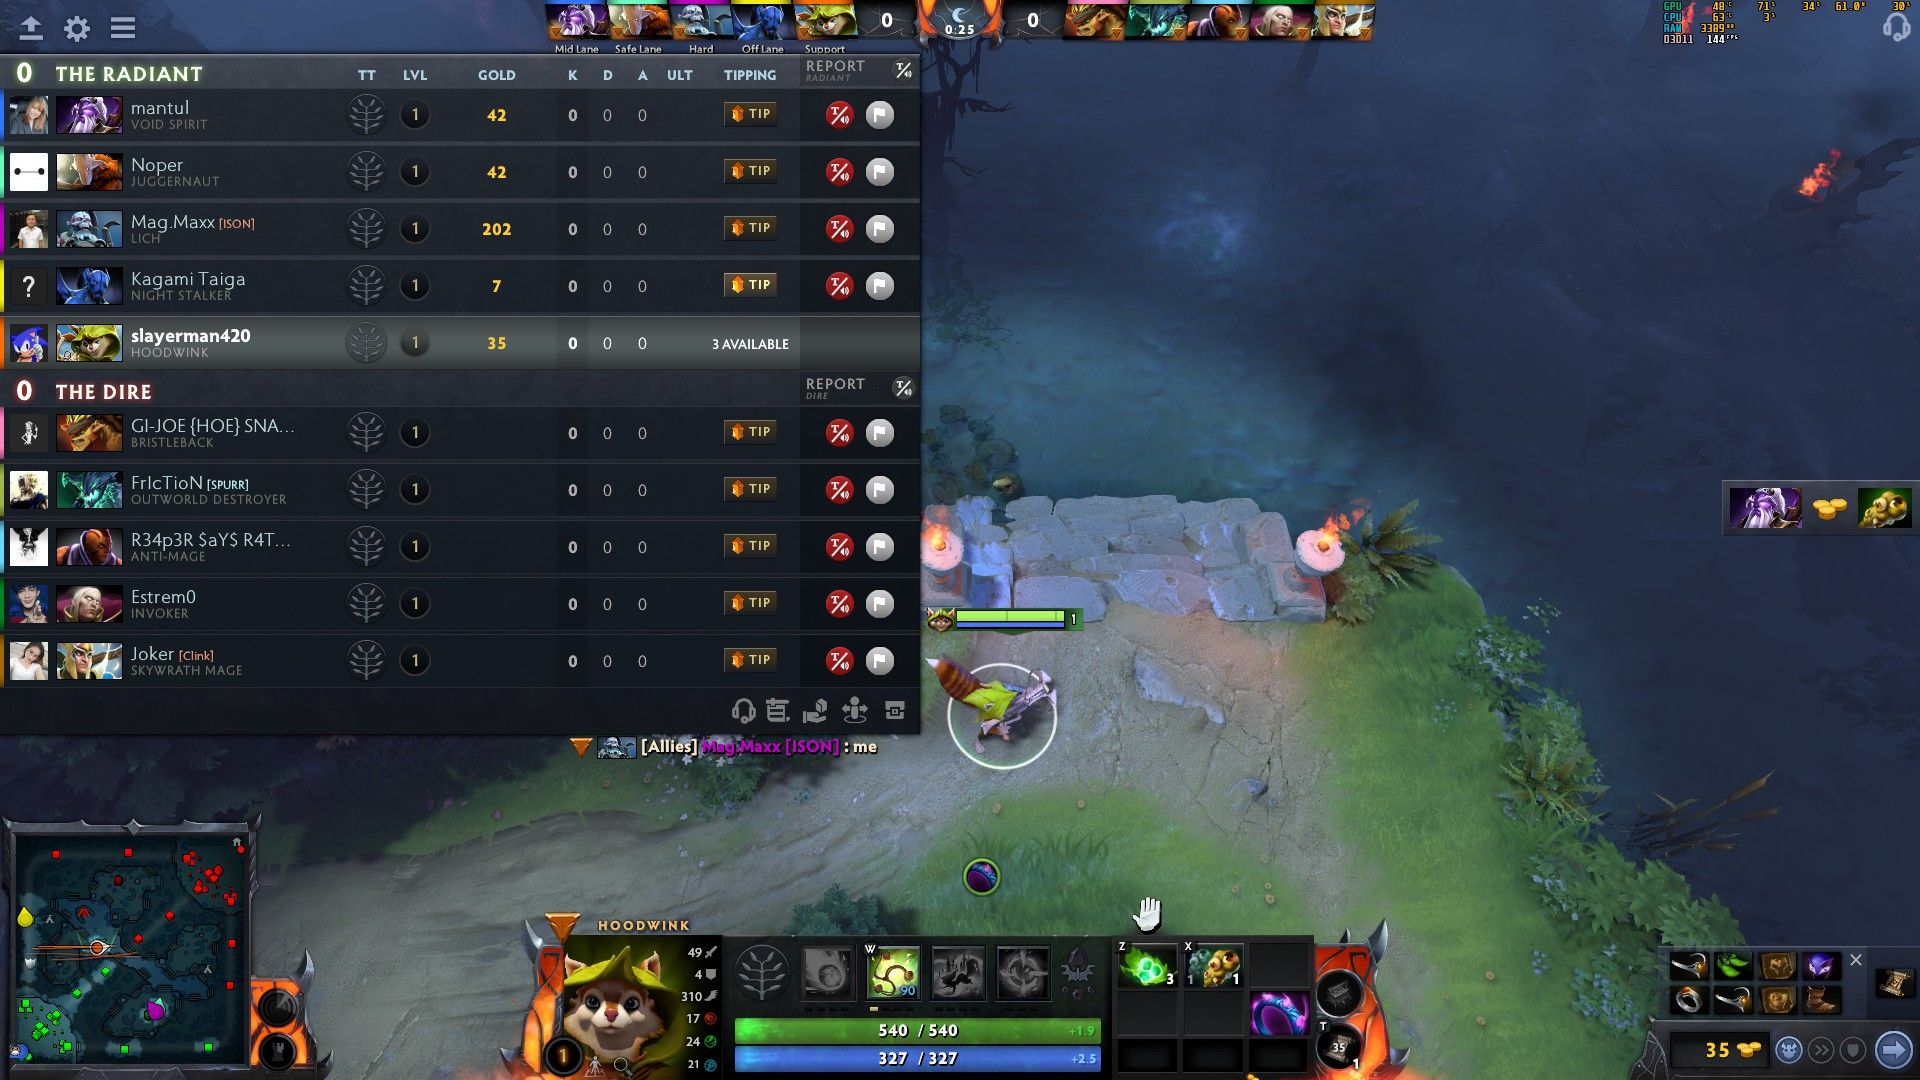 How to Tip in Dota 2